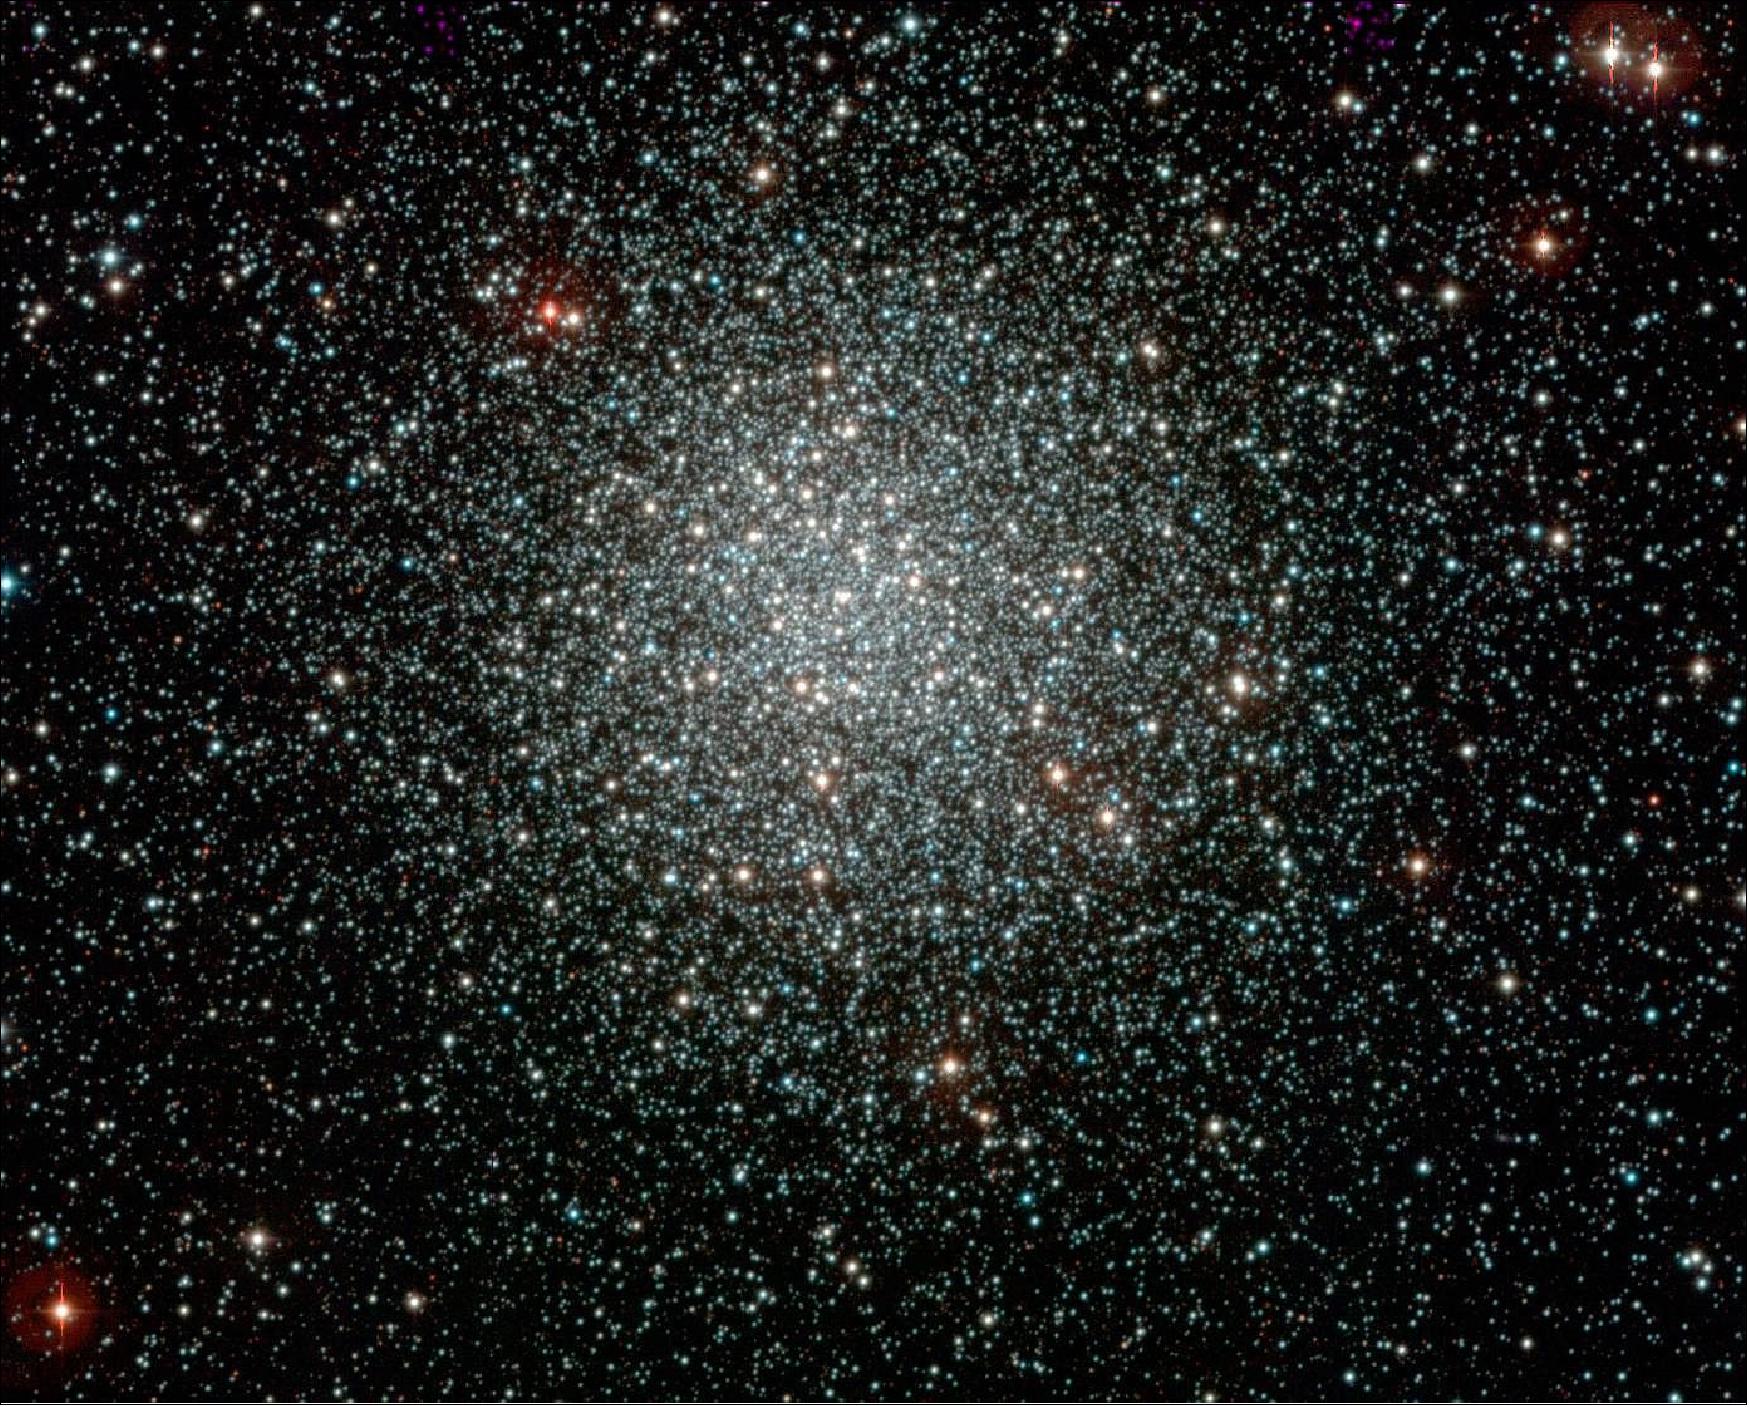 Figure 51: Invisible black hole-neutron star mergers, i.e. fusions without the emission of electromagnetic radiation, take place in dense stellar environments like in the globular cluster NGC 3201 seen here (image credit: ESO)